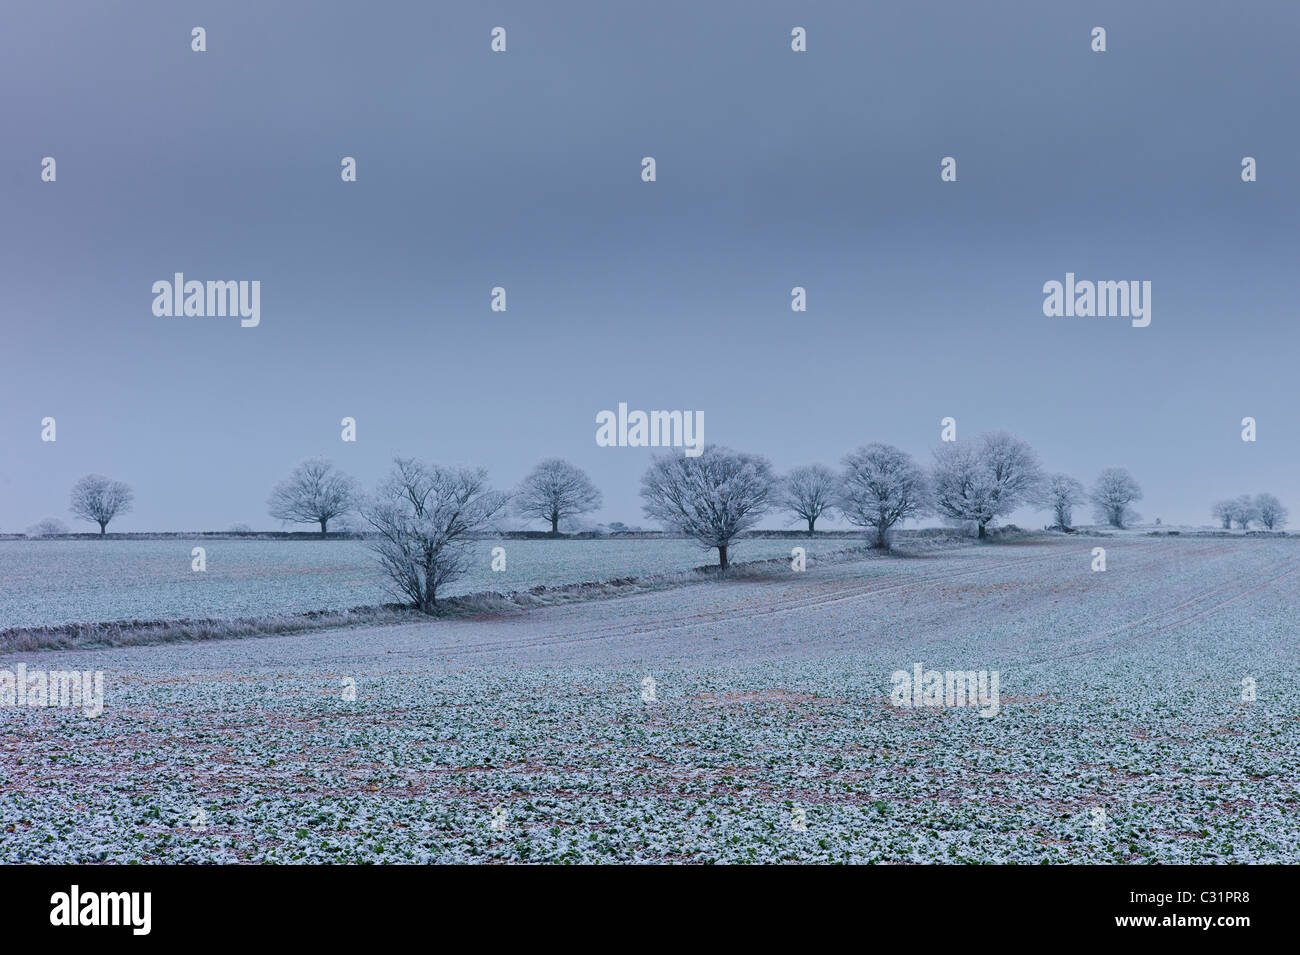 Hoar frost on trees and fields in frosty wintry landscape in The Cotswolds, Oxfordshire, UK Stock Photo